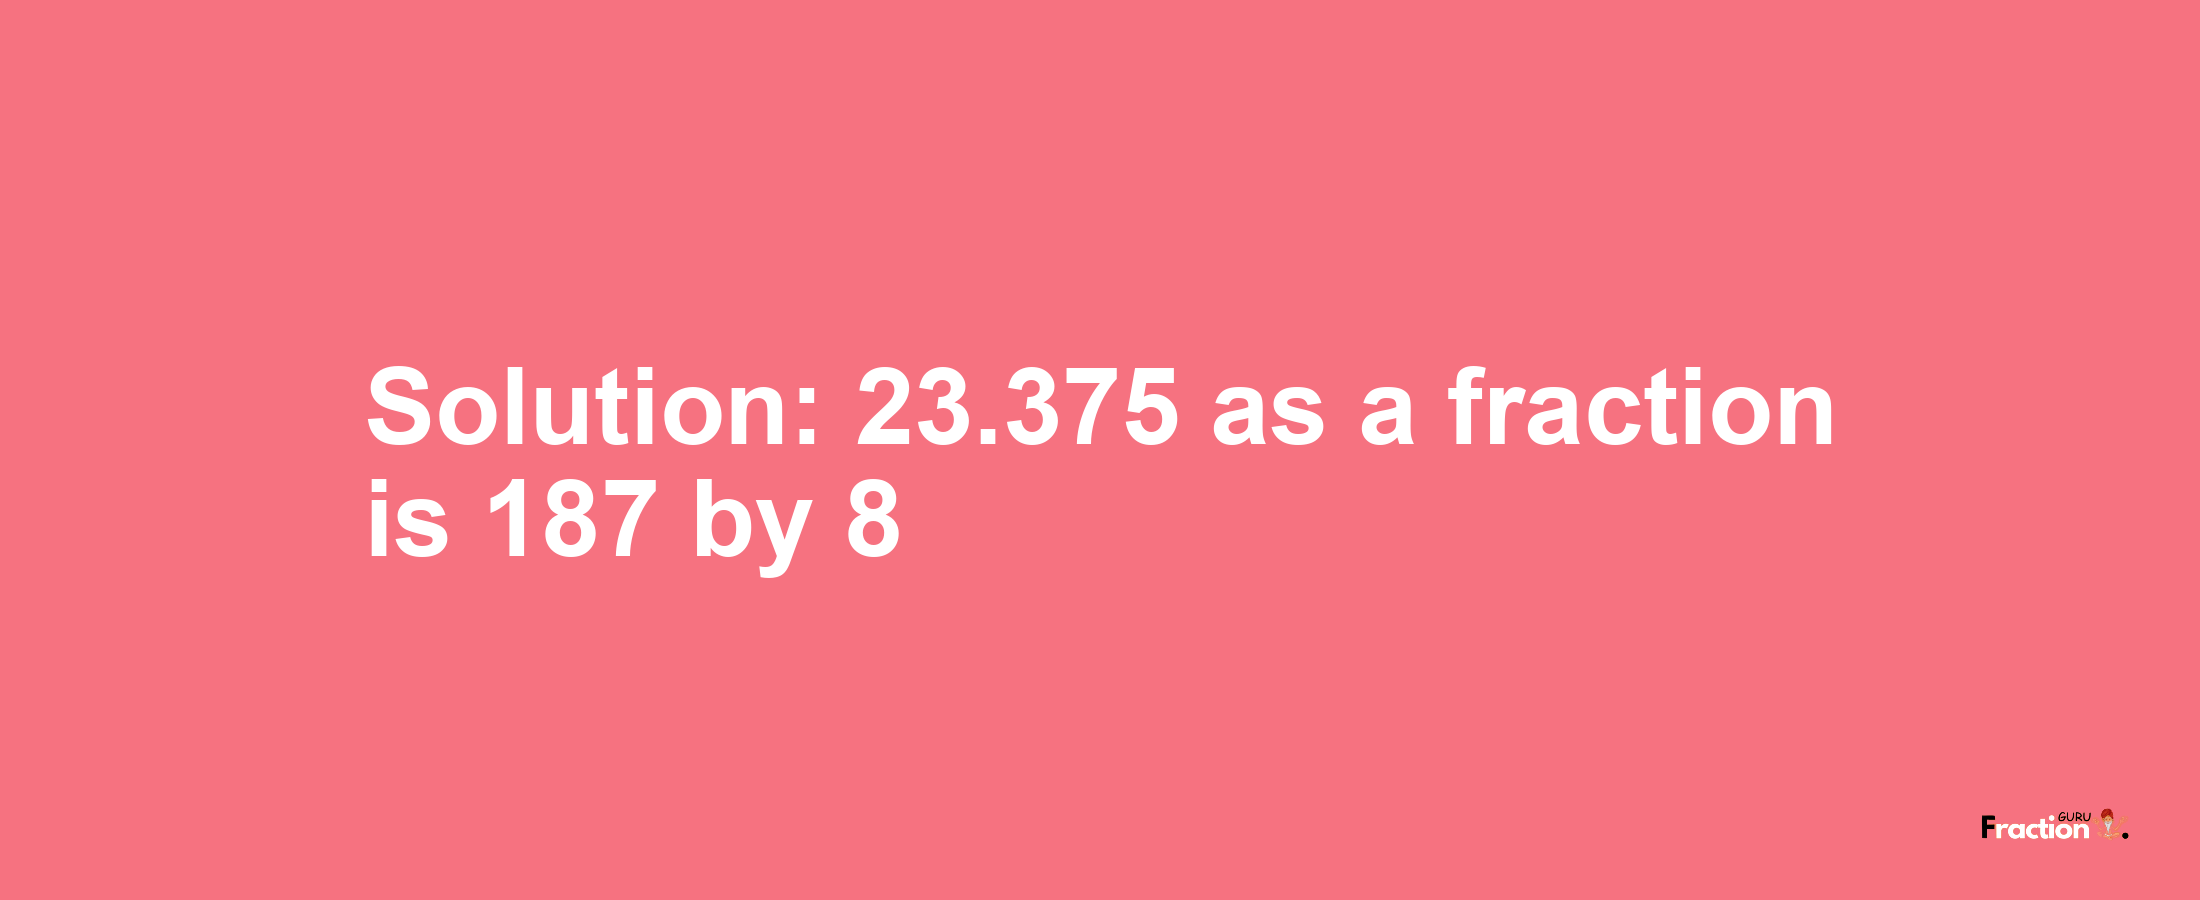 Solution:23.375 as a fraction is 187/8